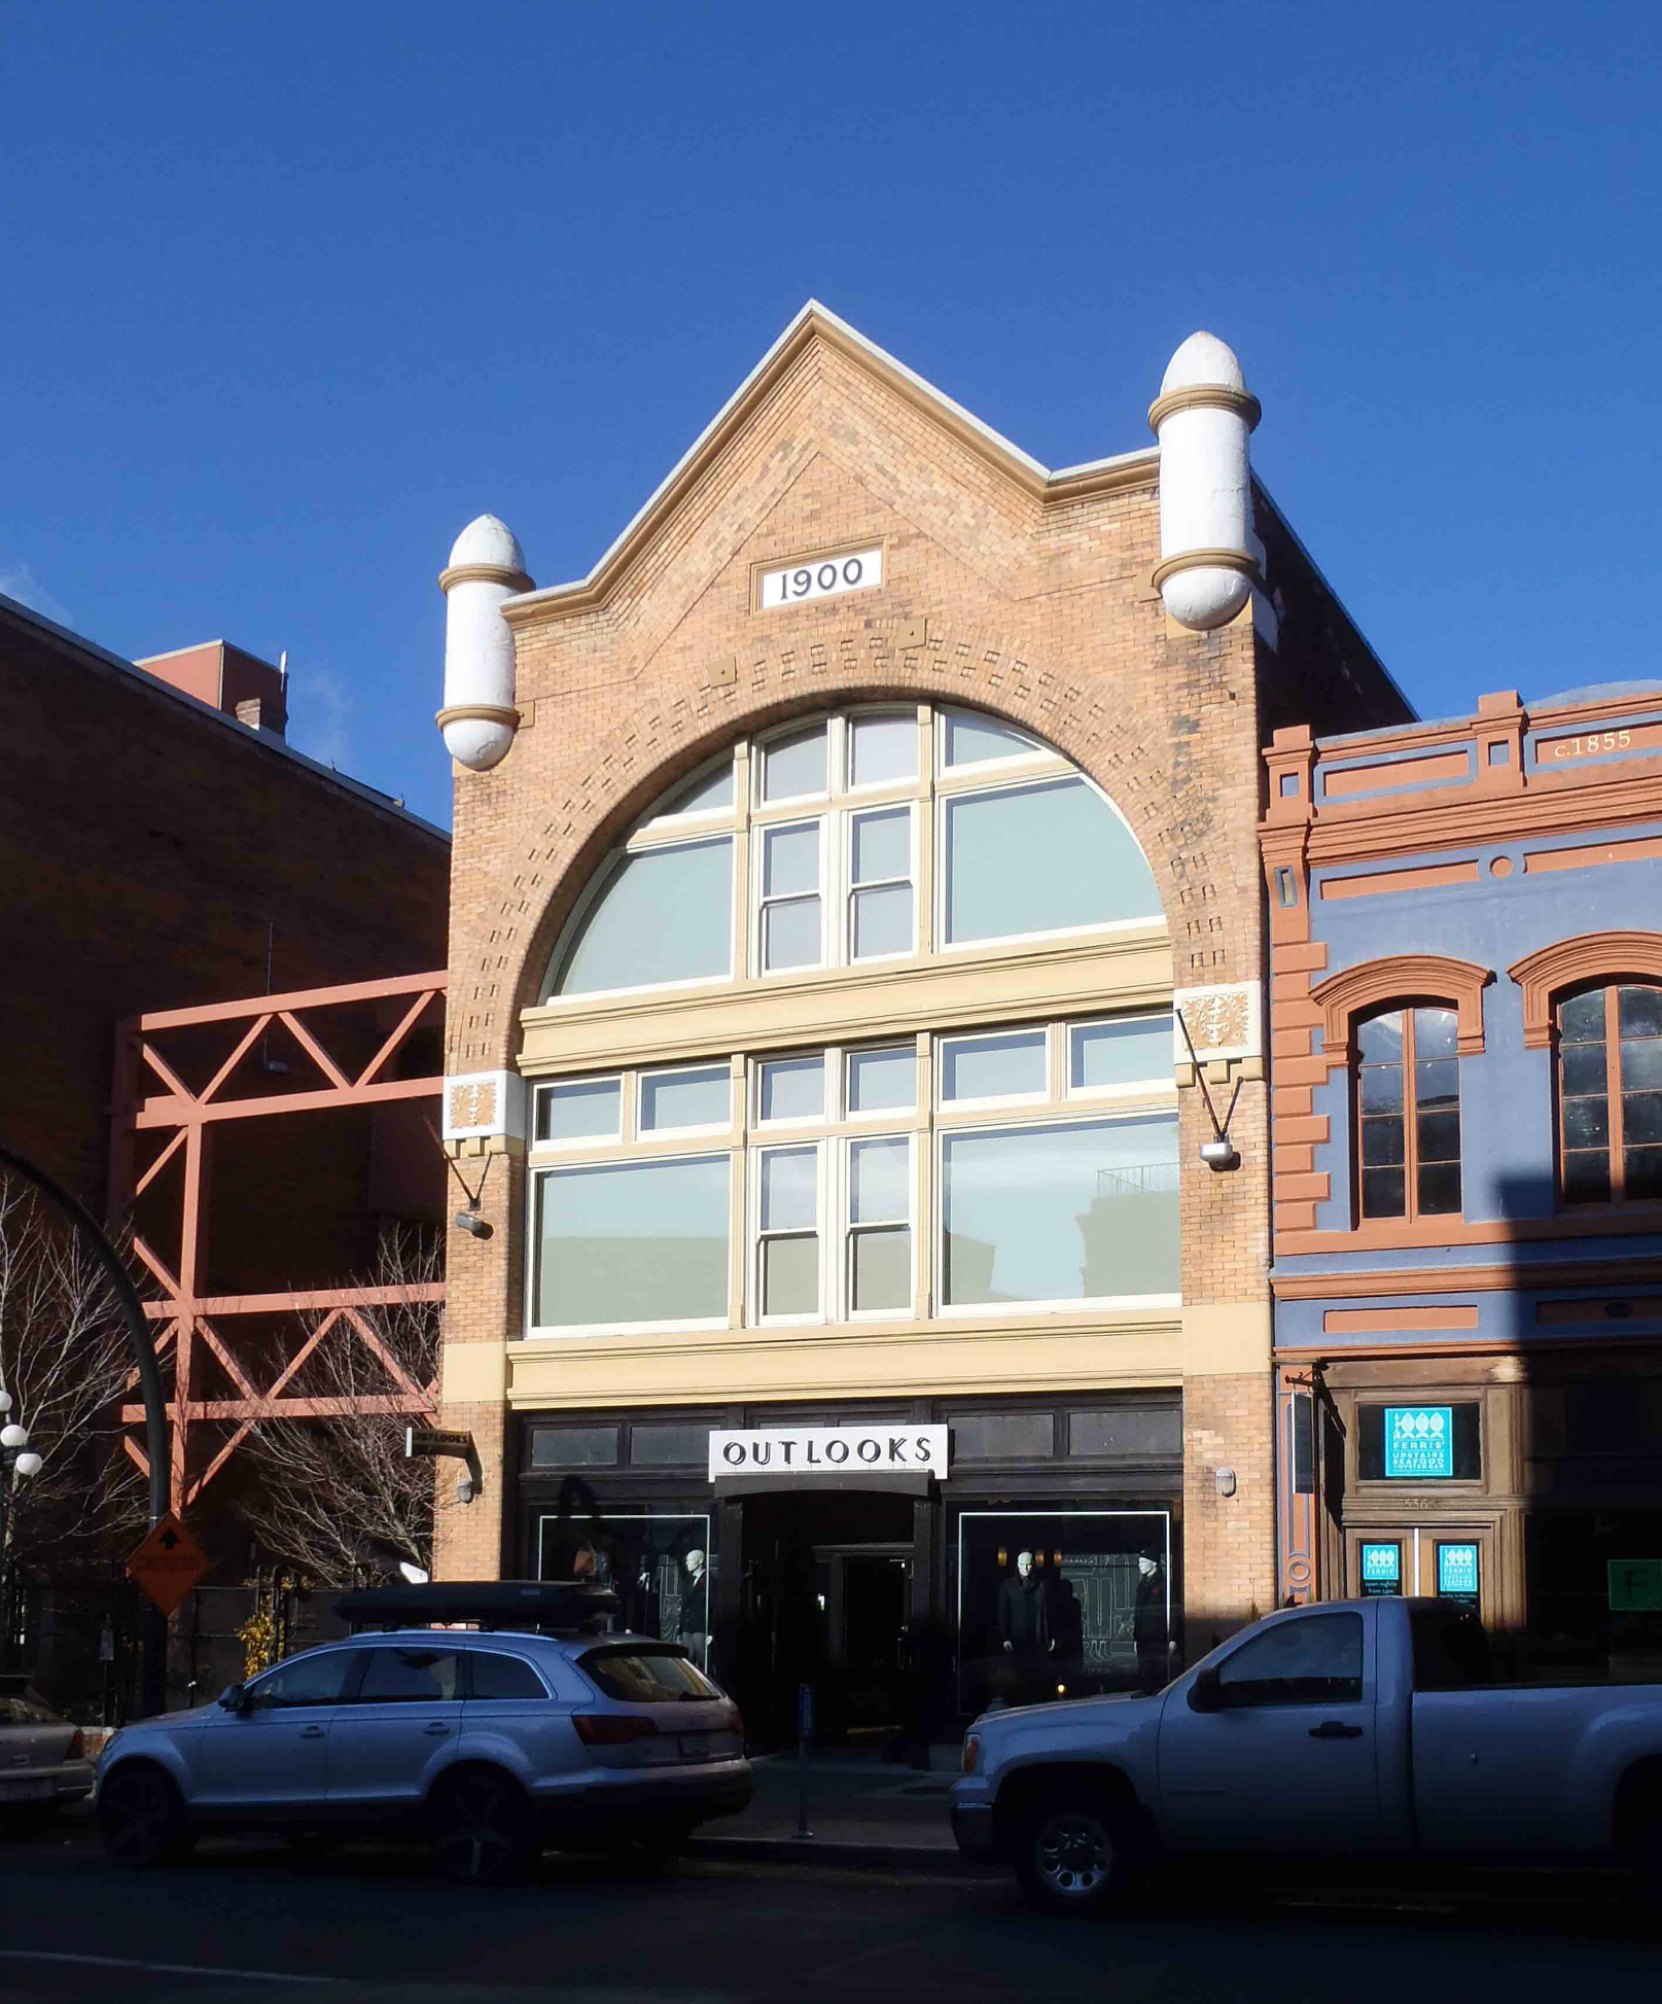 Earle Building. 530-534 Yates Street. Built in 1900 as a warehouse for Thomas Earle by architect Thomas Hooper.